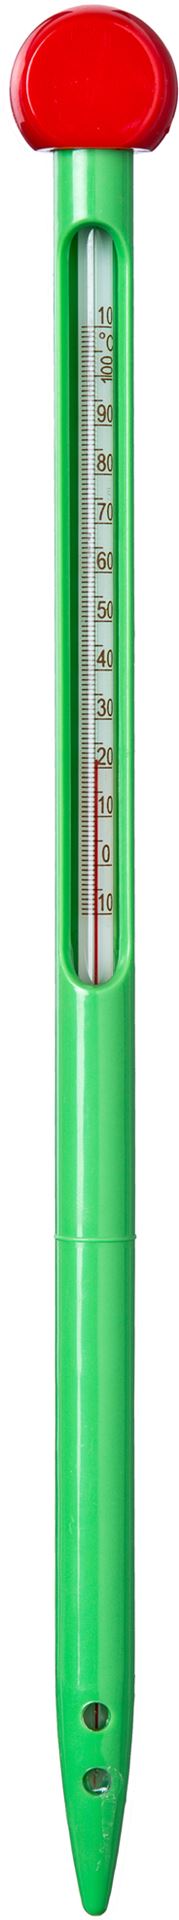 Compost-thermometer-32cm